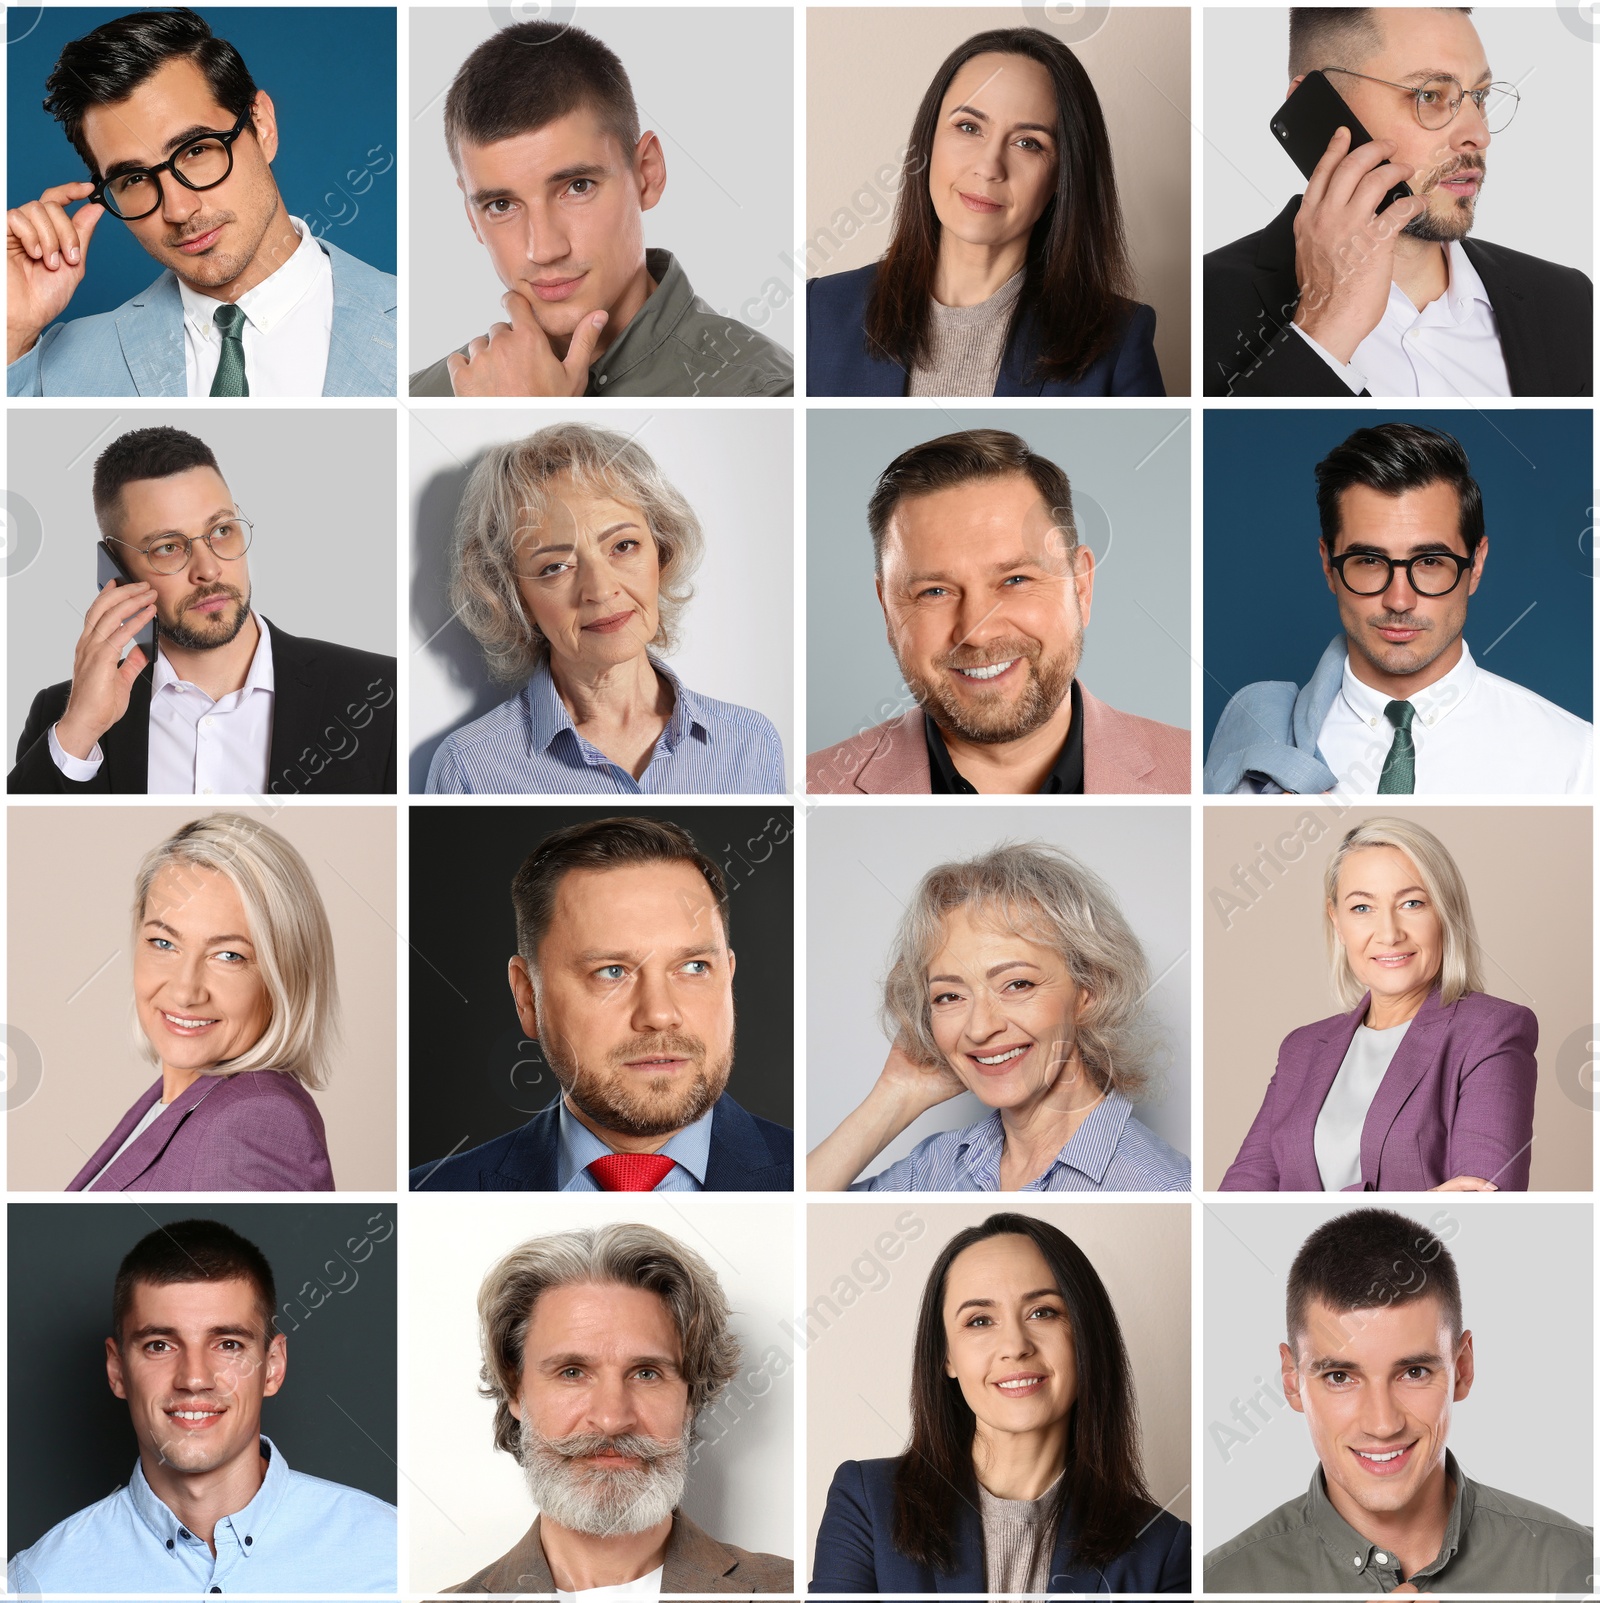 Image of Collage with portraits of different business people 